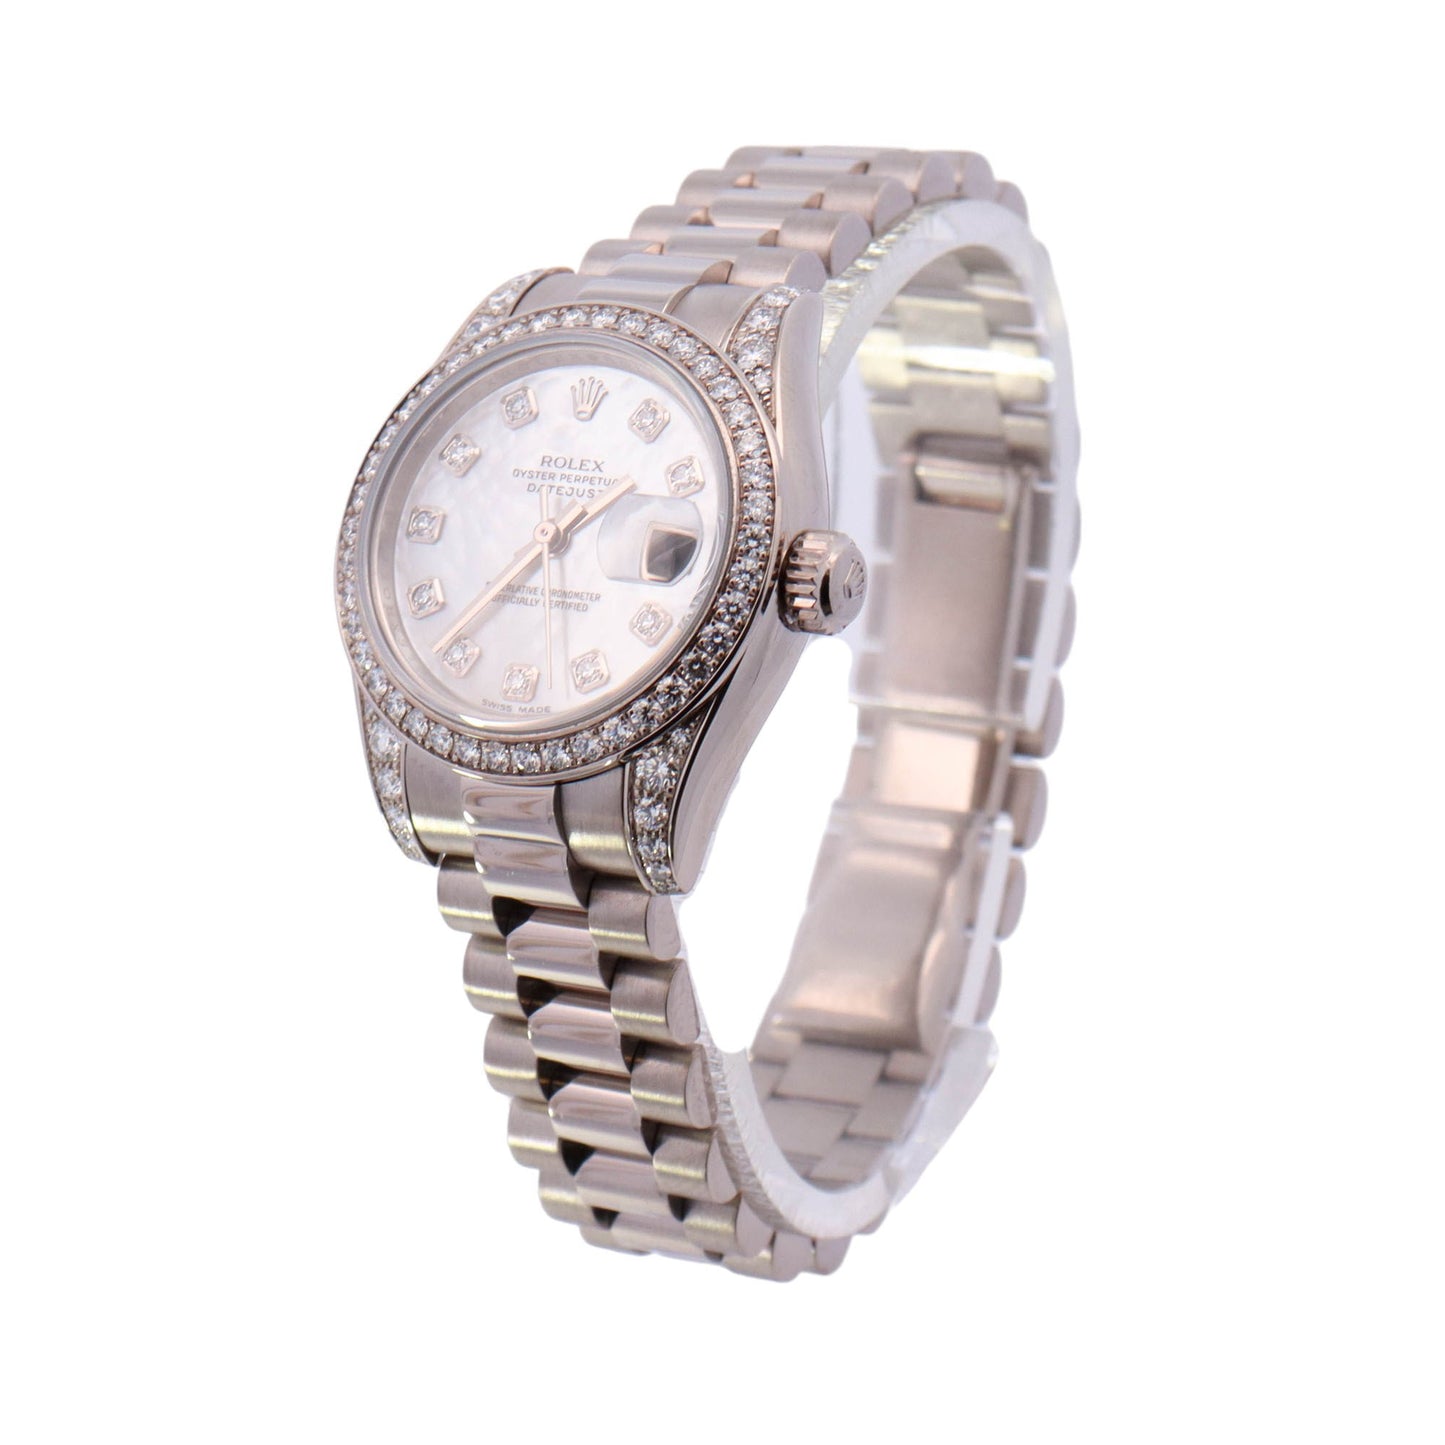 Rolex Datejust White Gold 26mm Factory White MOP Diamond Dial Watch Reference# 179159 - Happy Jewelers Fine Jewelry Lifetime Warranty